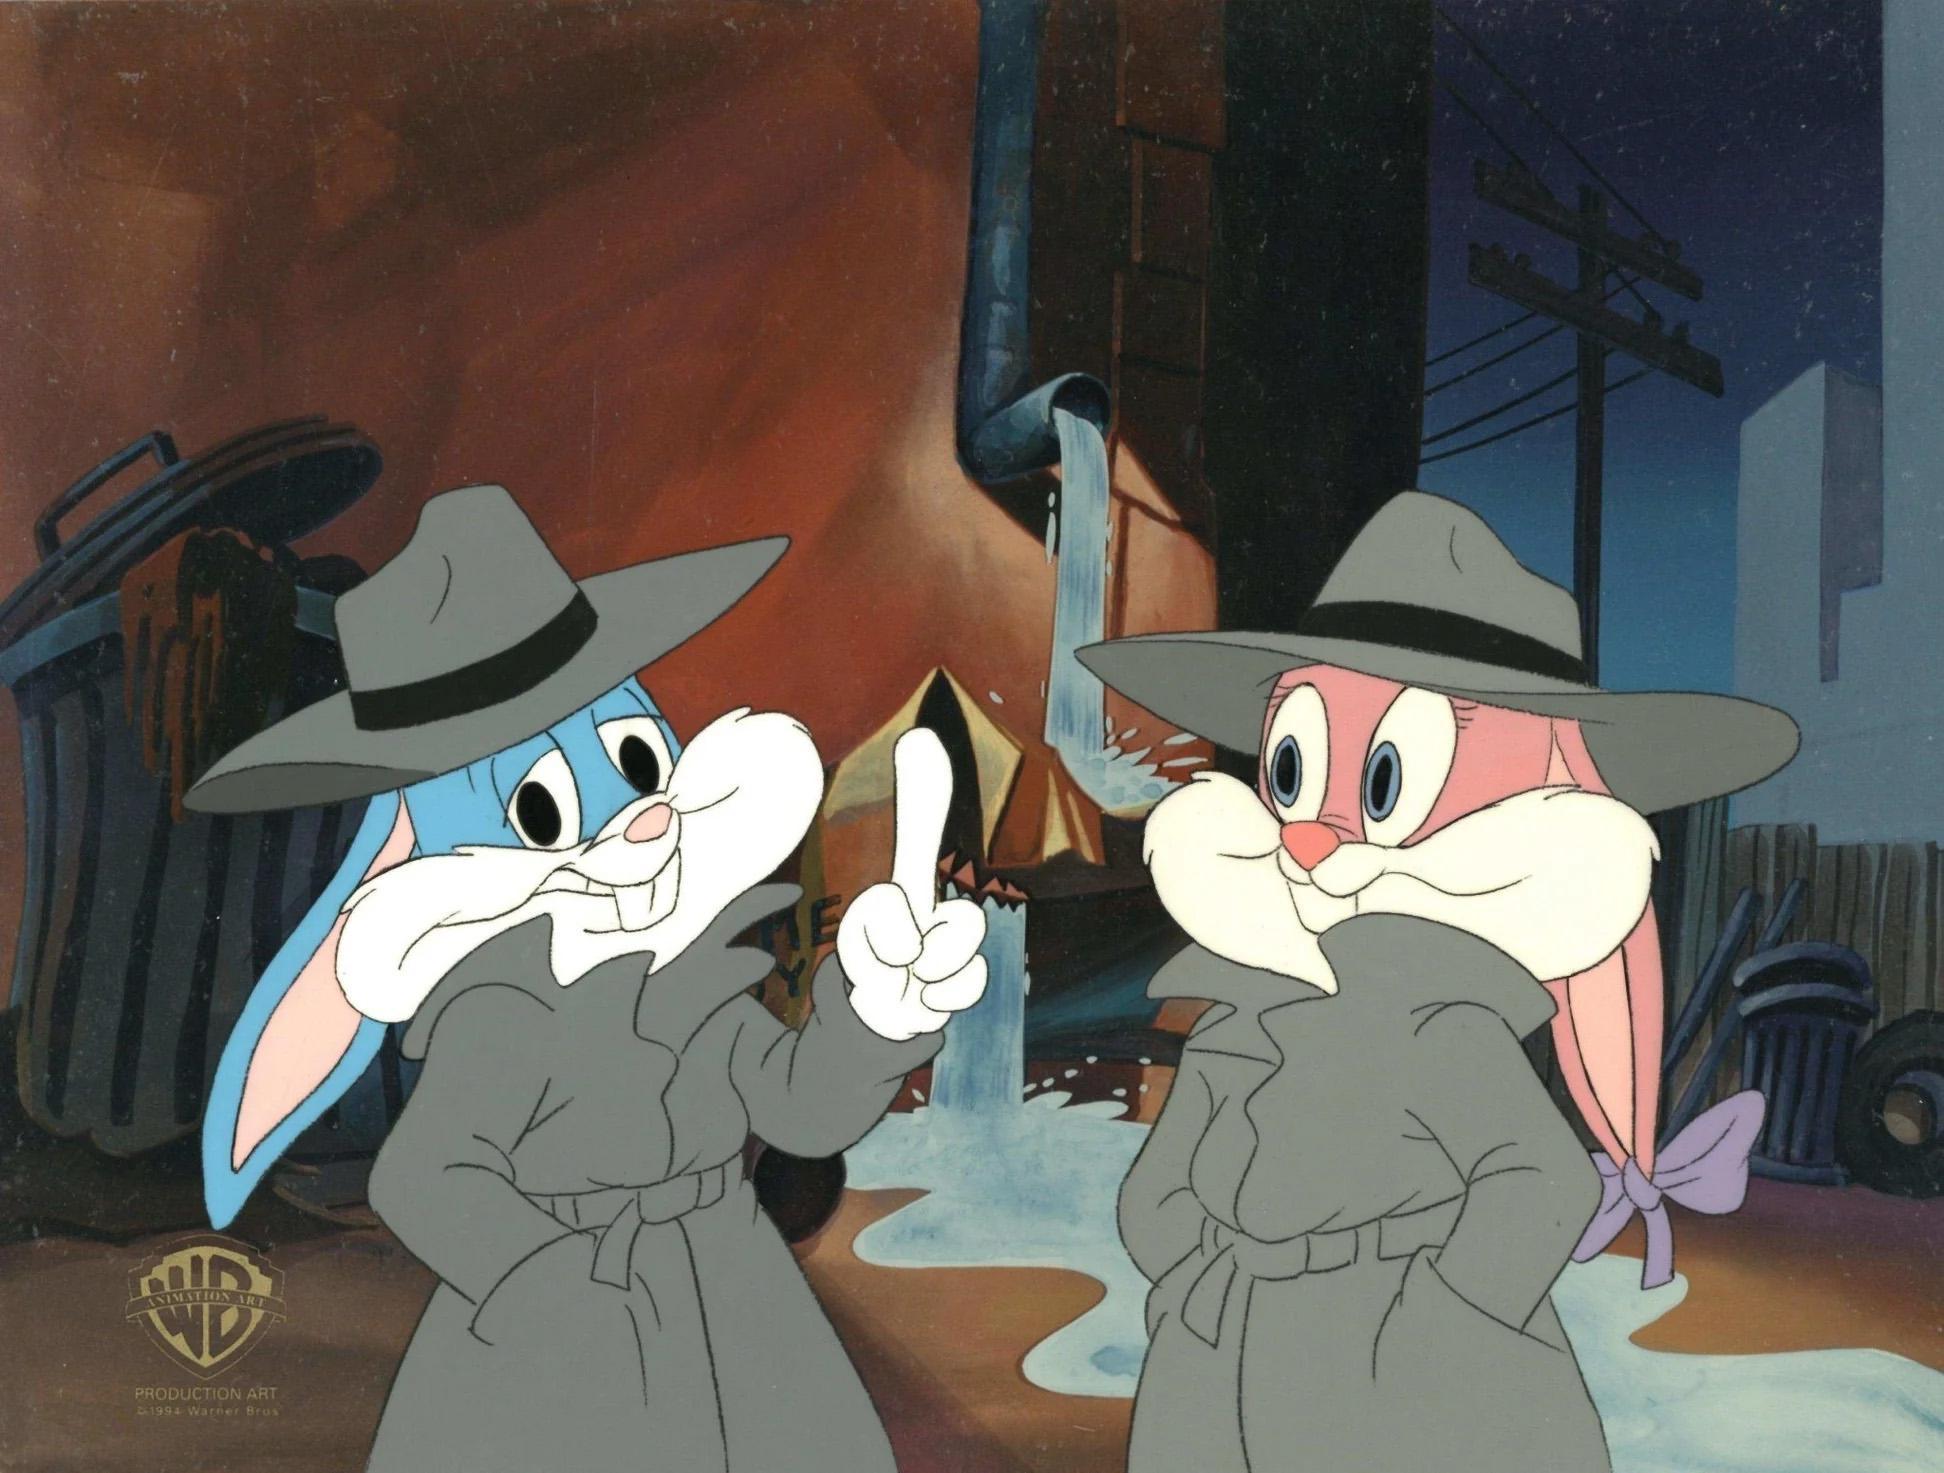 Tiny Toons Original Production Cel: Buster Bunny and Babs Bunny - Art by Warner Bros. Studio Artists